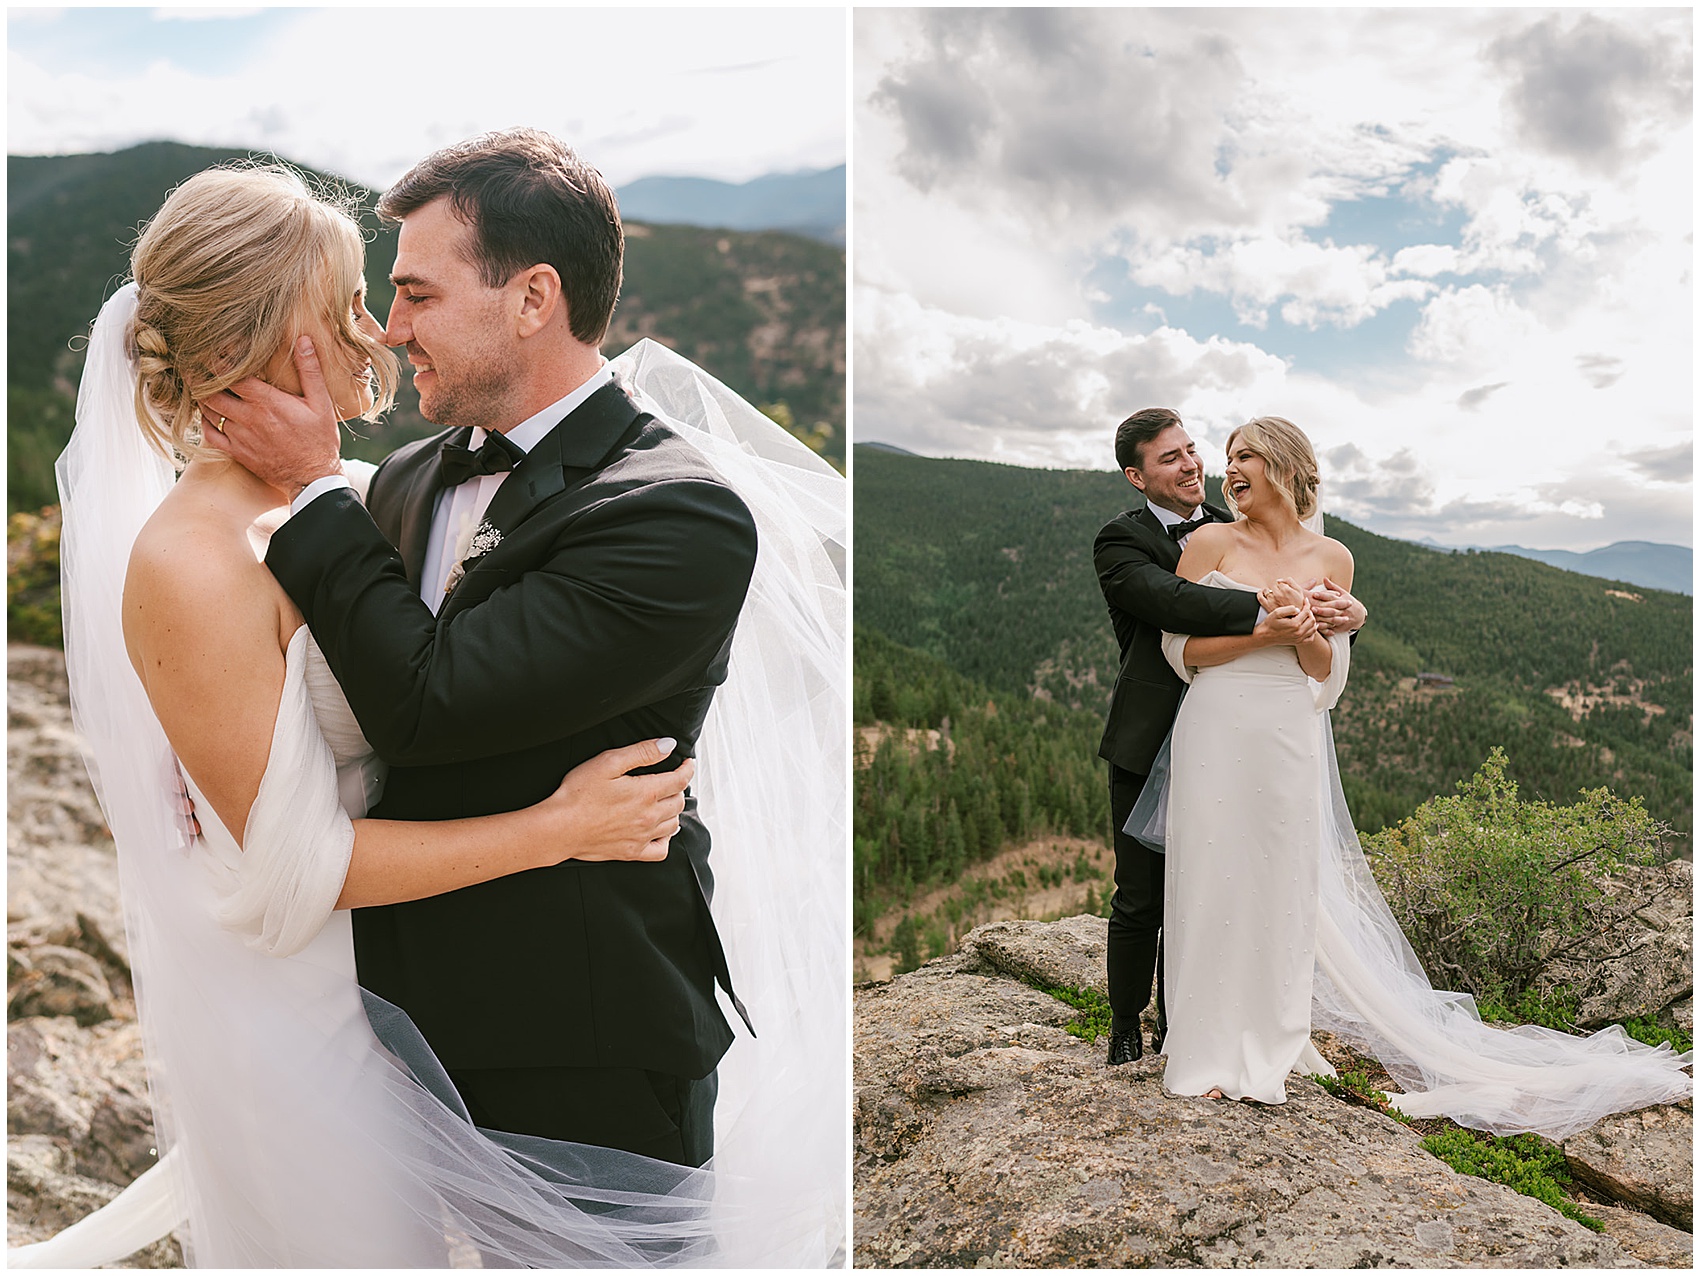 Newlyweds laugh and kiss while standing on a rocky mountain overlook